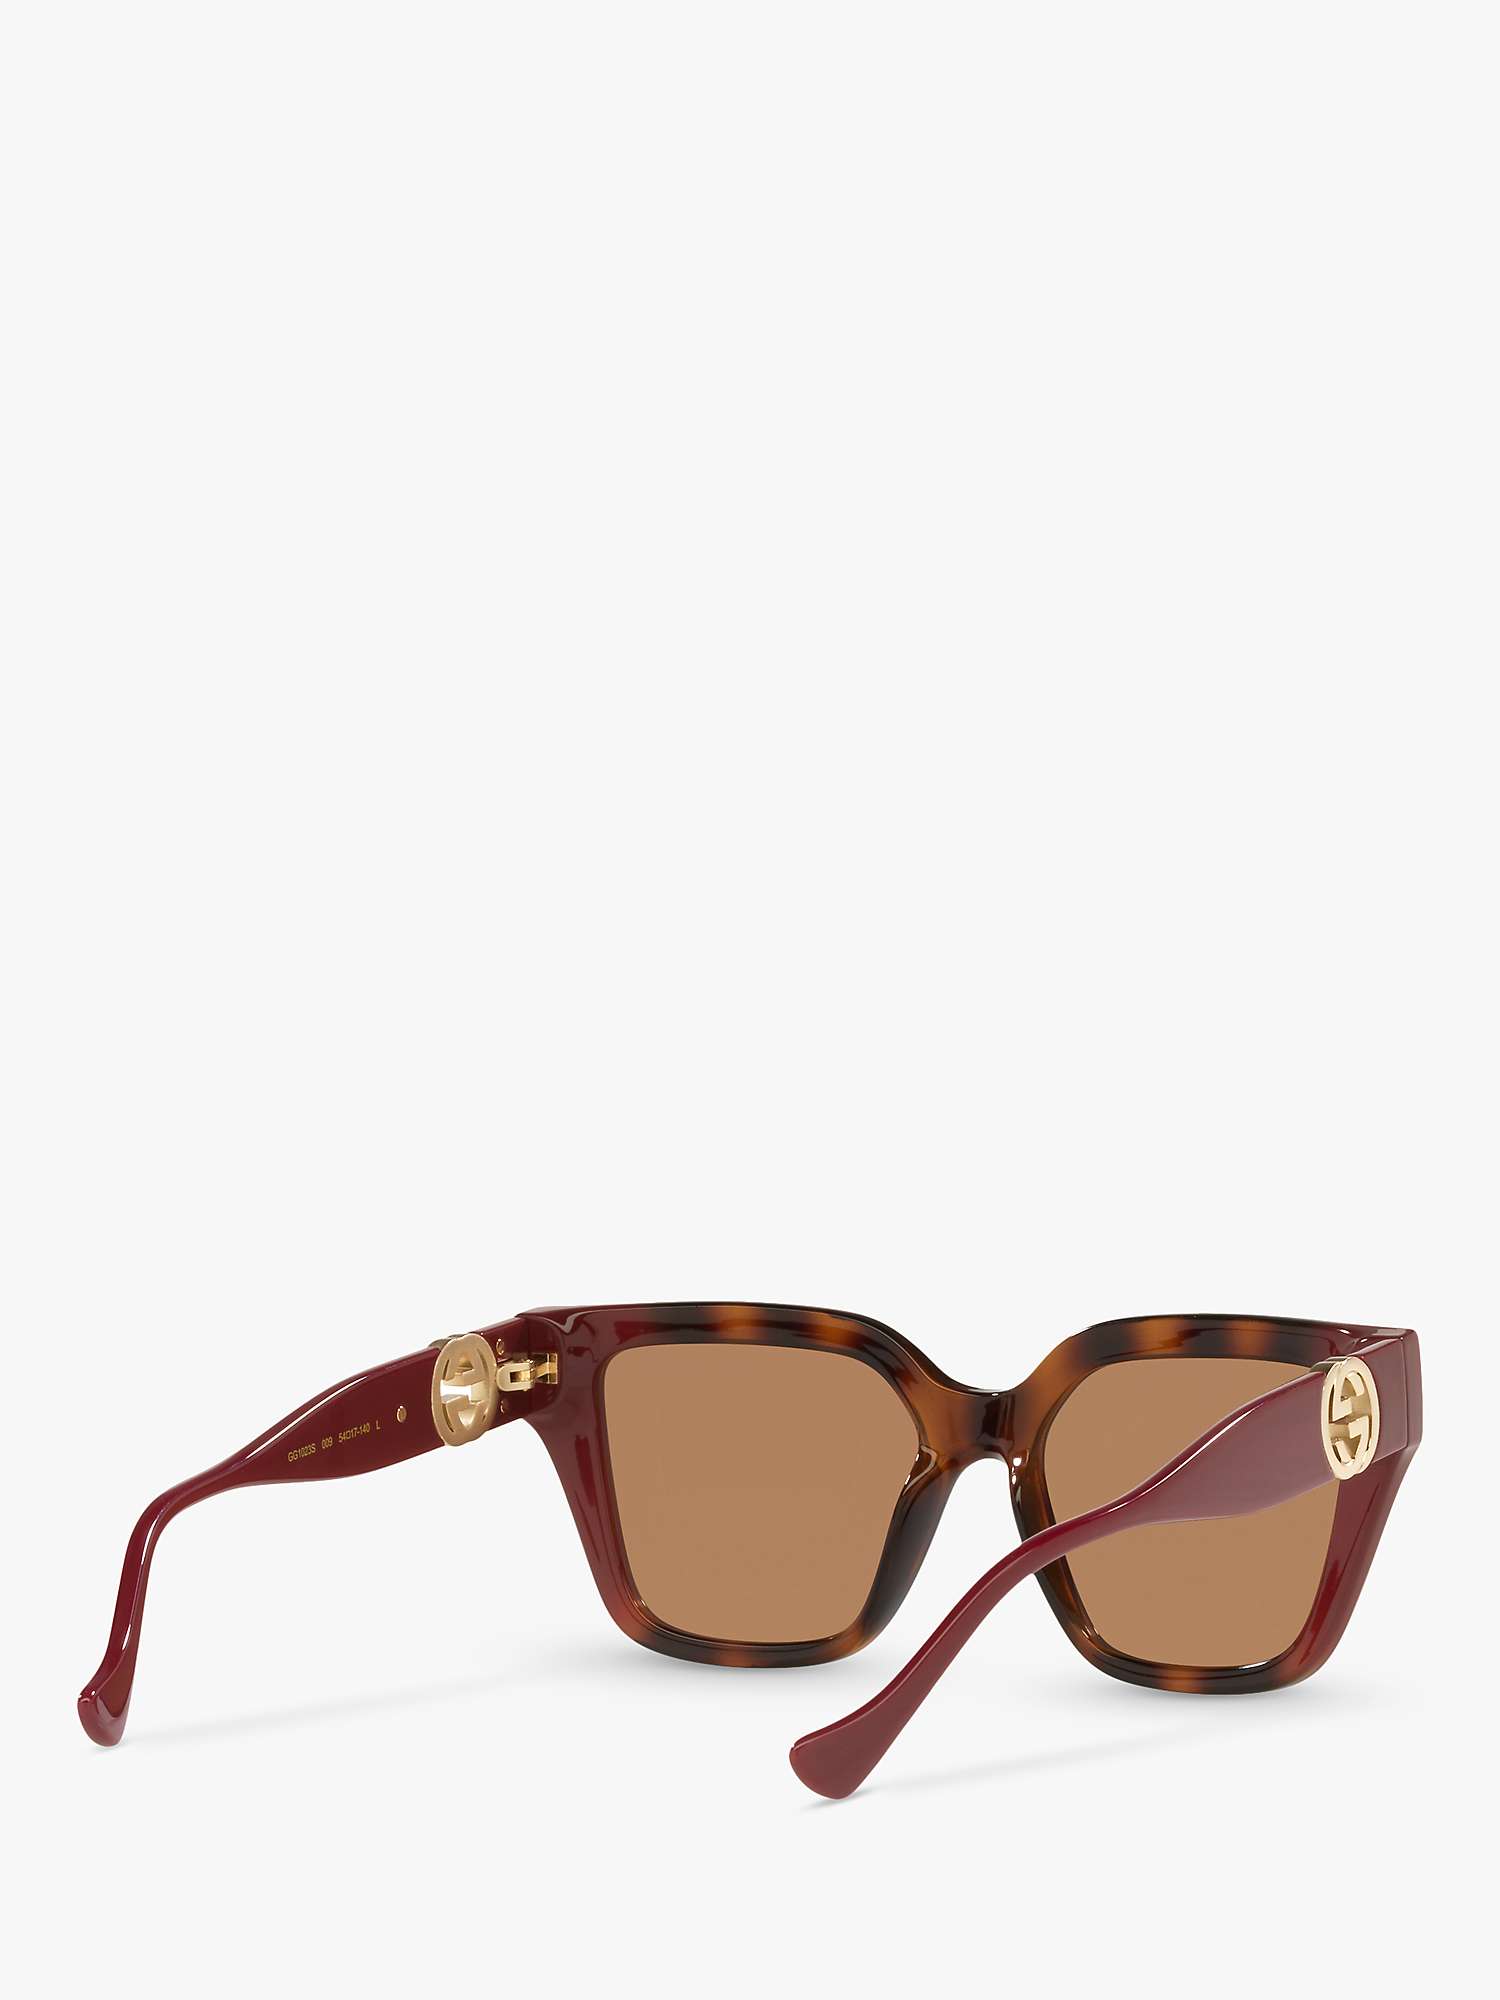 Gucci GG1023S Women's D-Frame Sunglasses, Brown Red/Brown at John Lewis ...